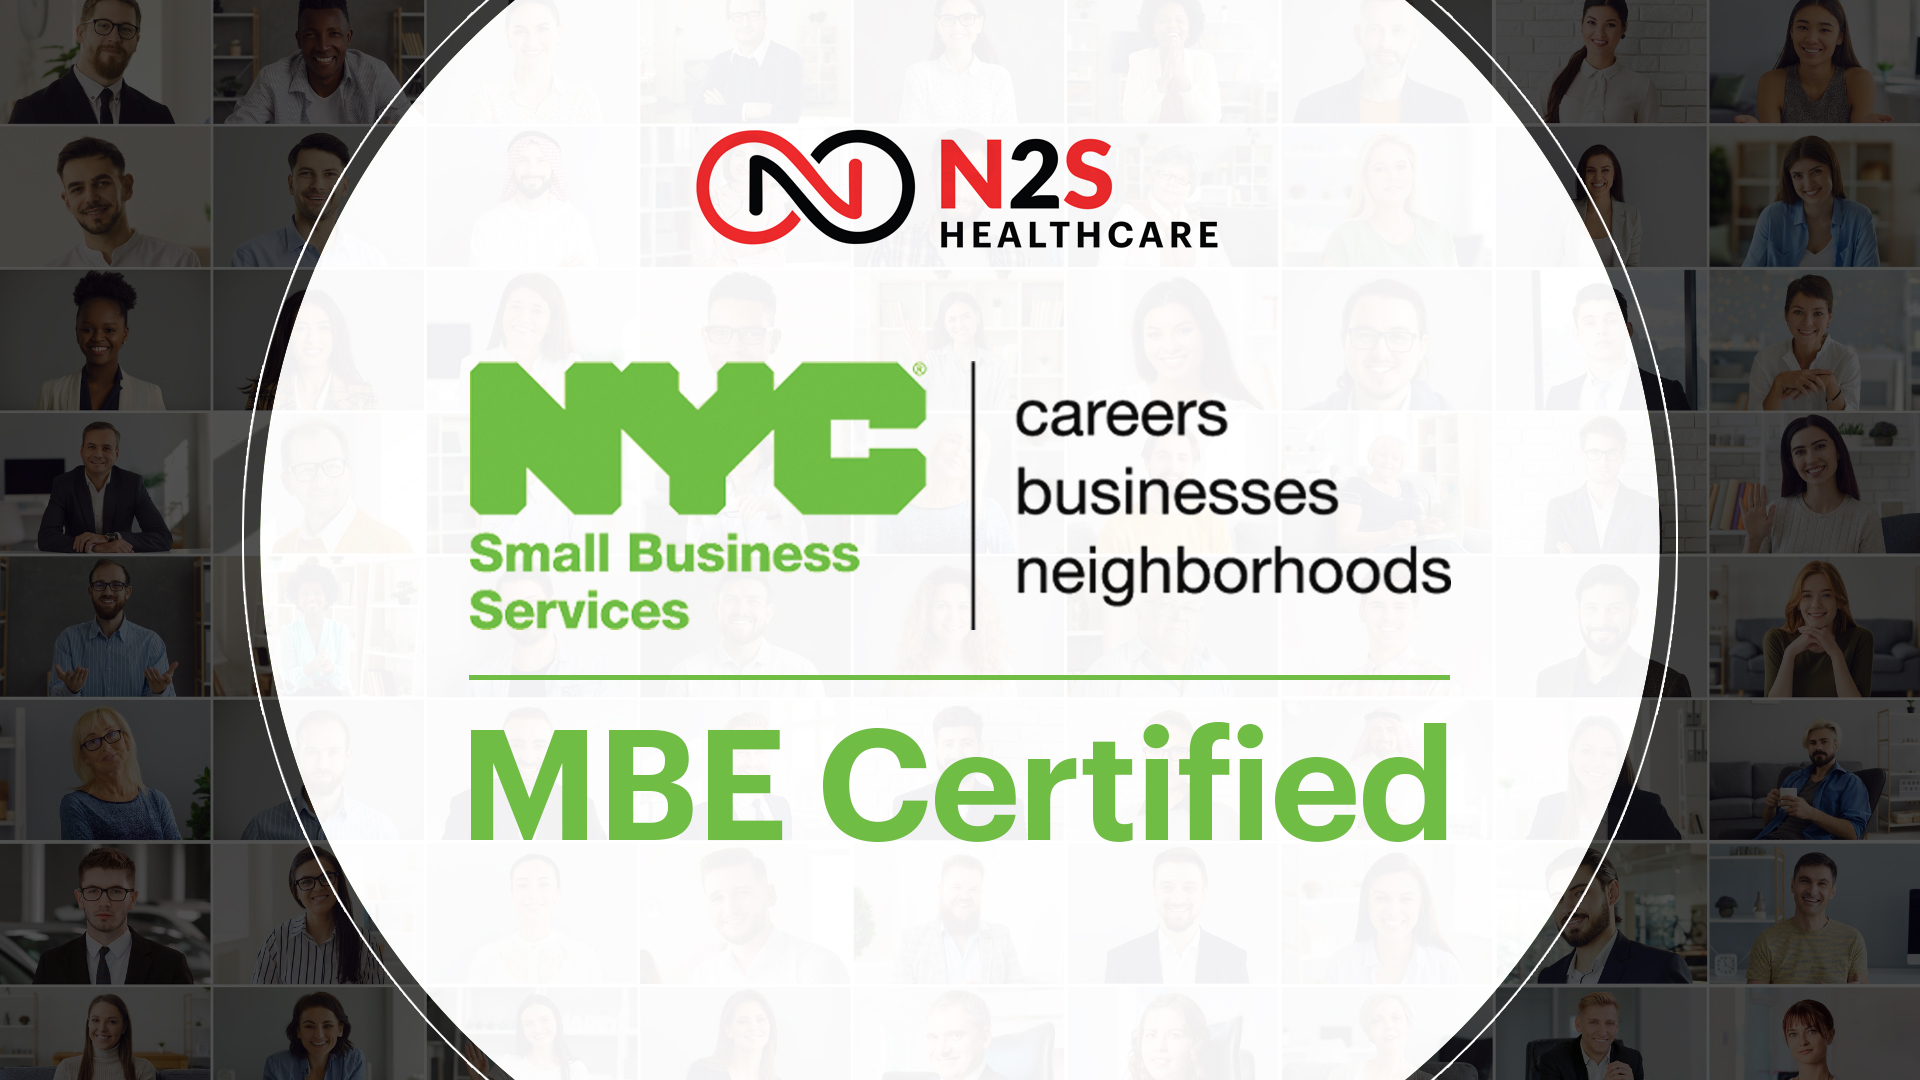 N2S healthcare is now MBE Certified by NYC Small Business Services